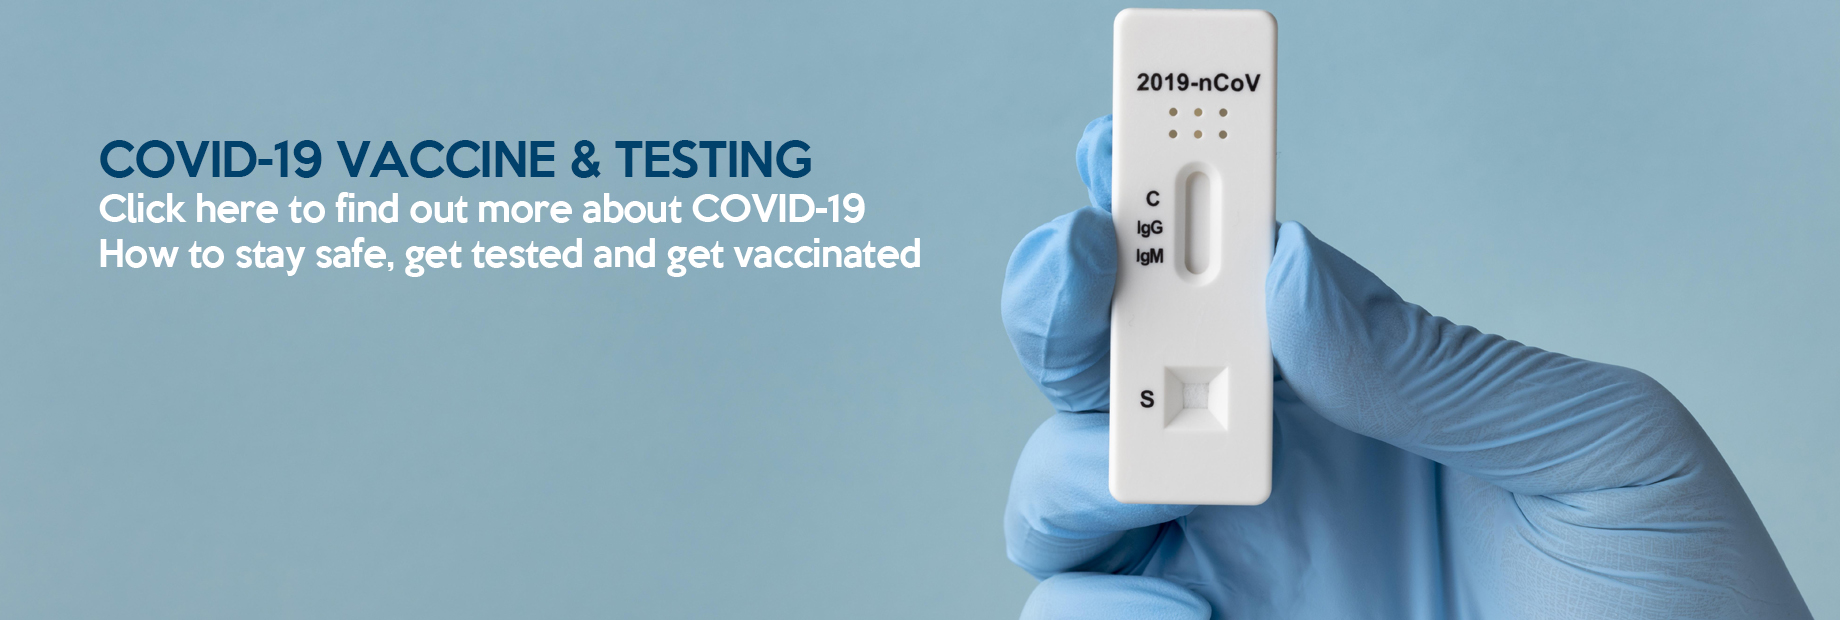 COVID-19 vaccine and testing